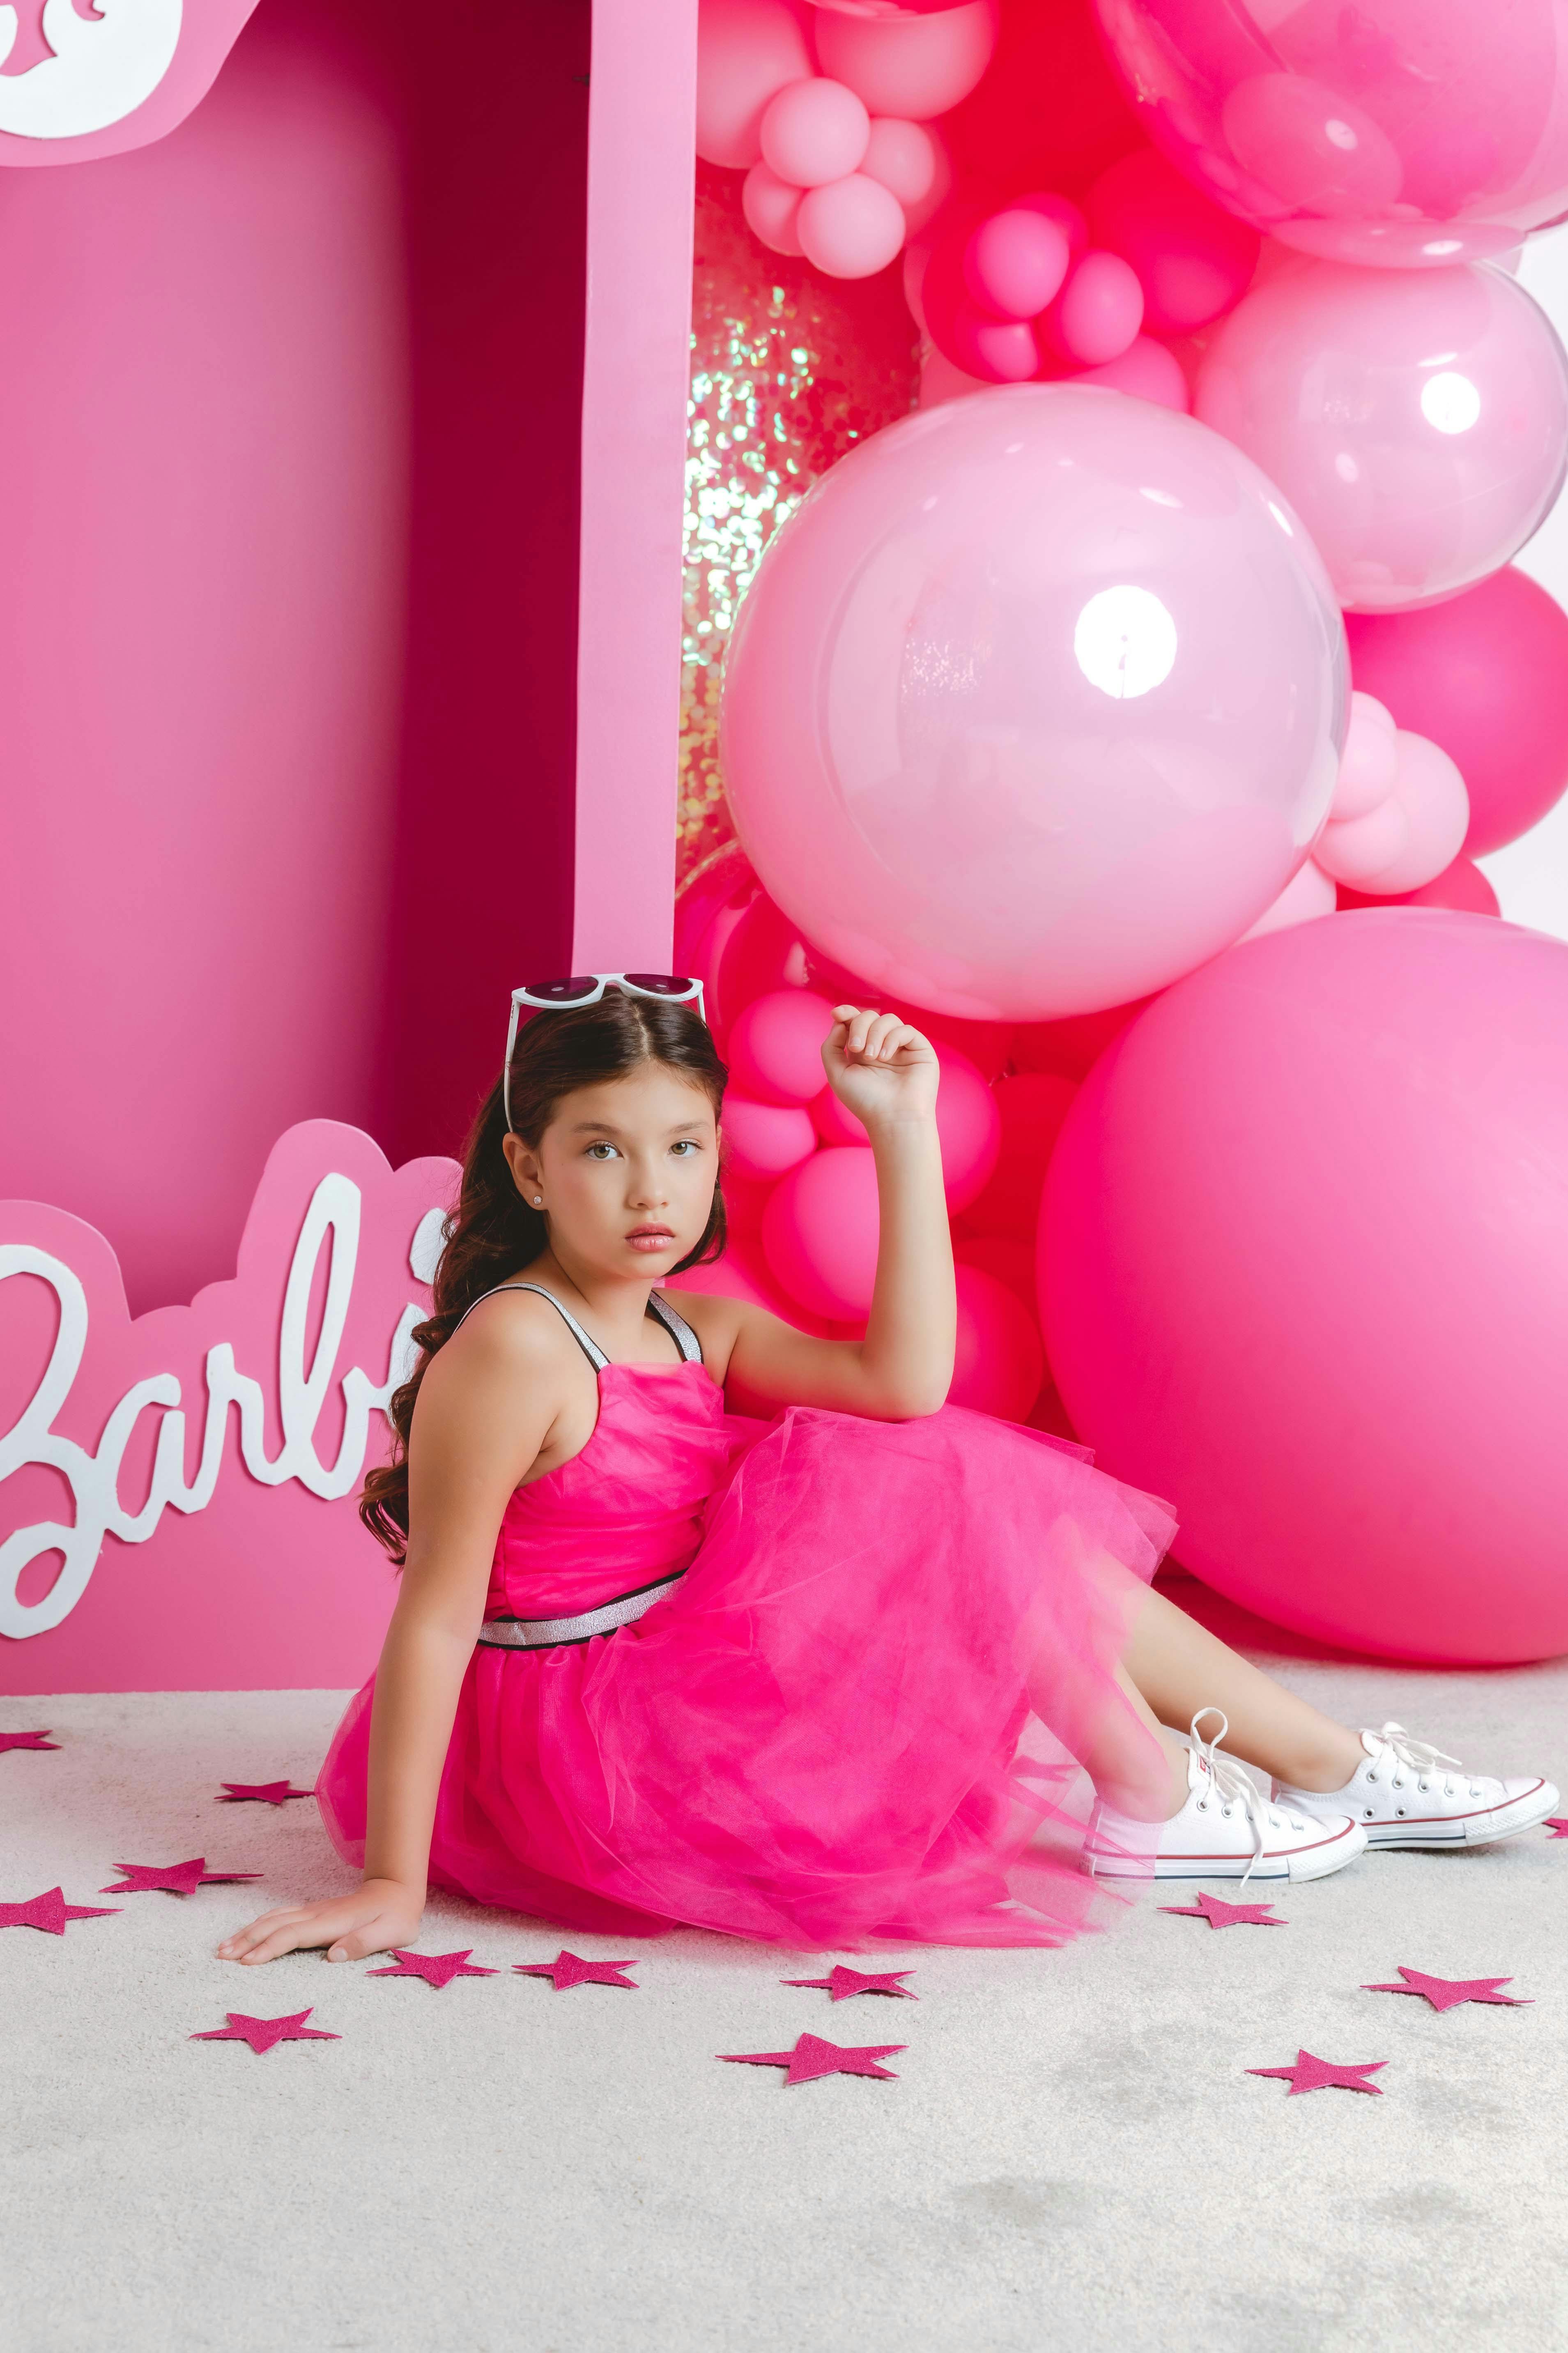 free photo of girl in a pink dress posing as barbie